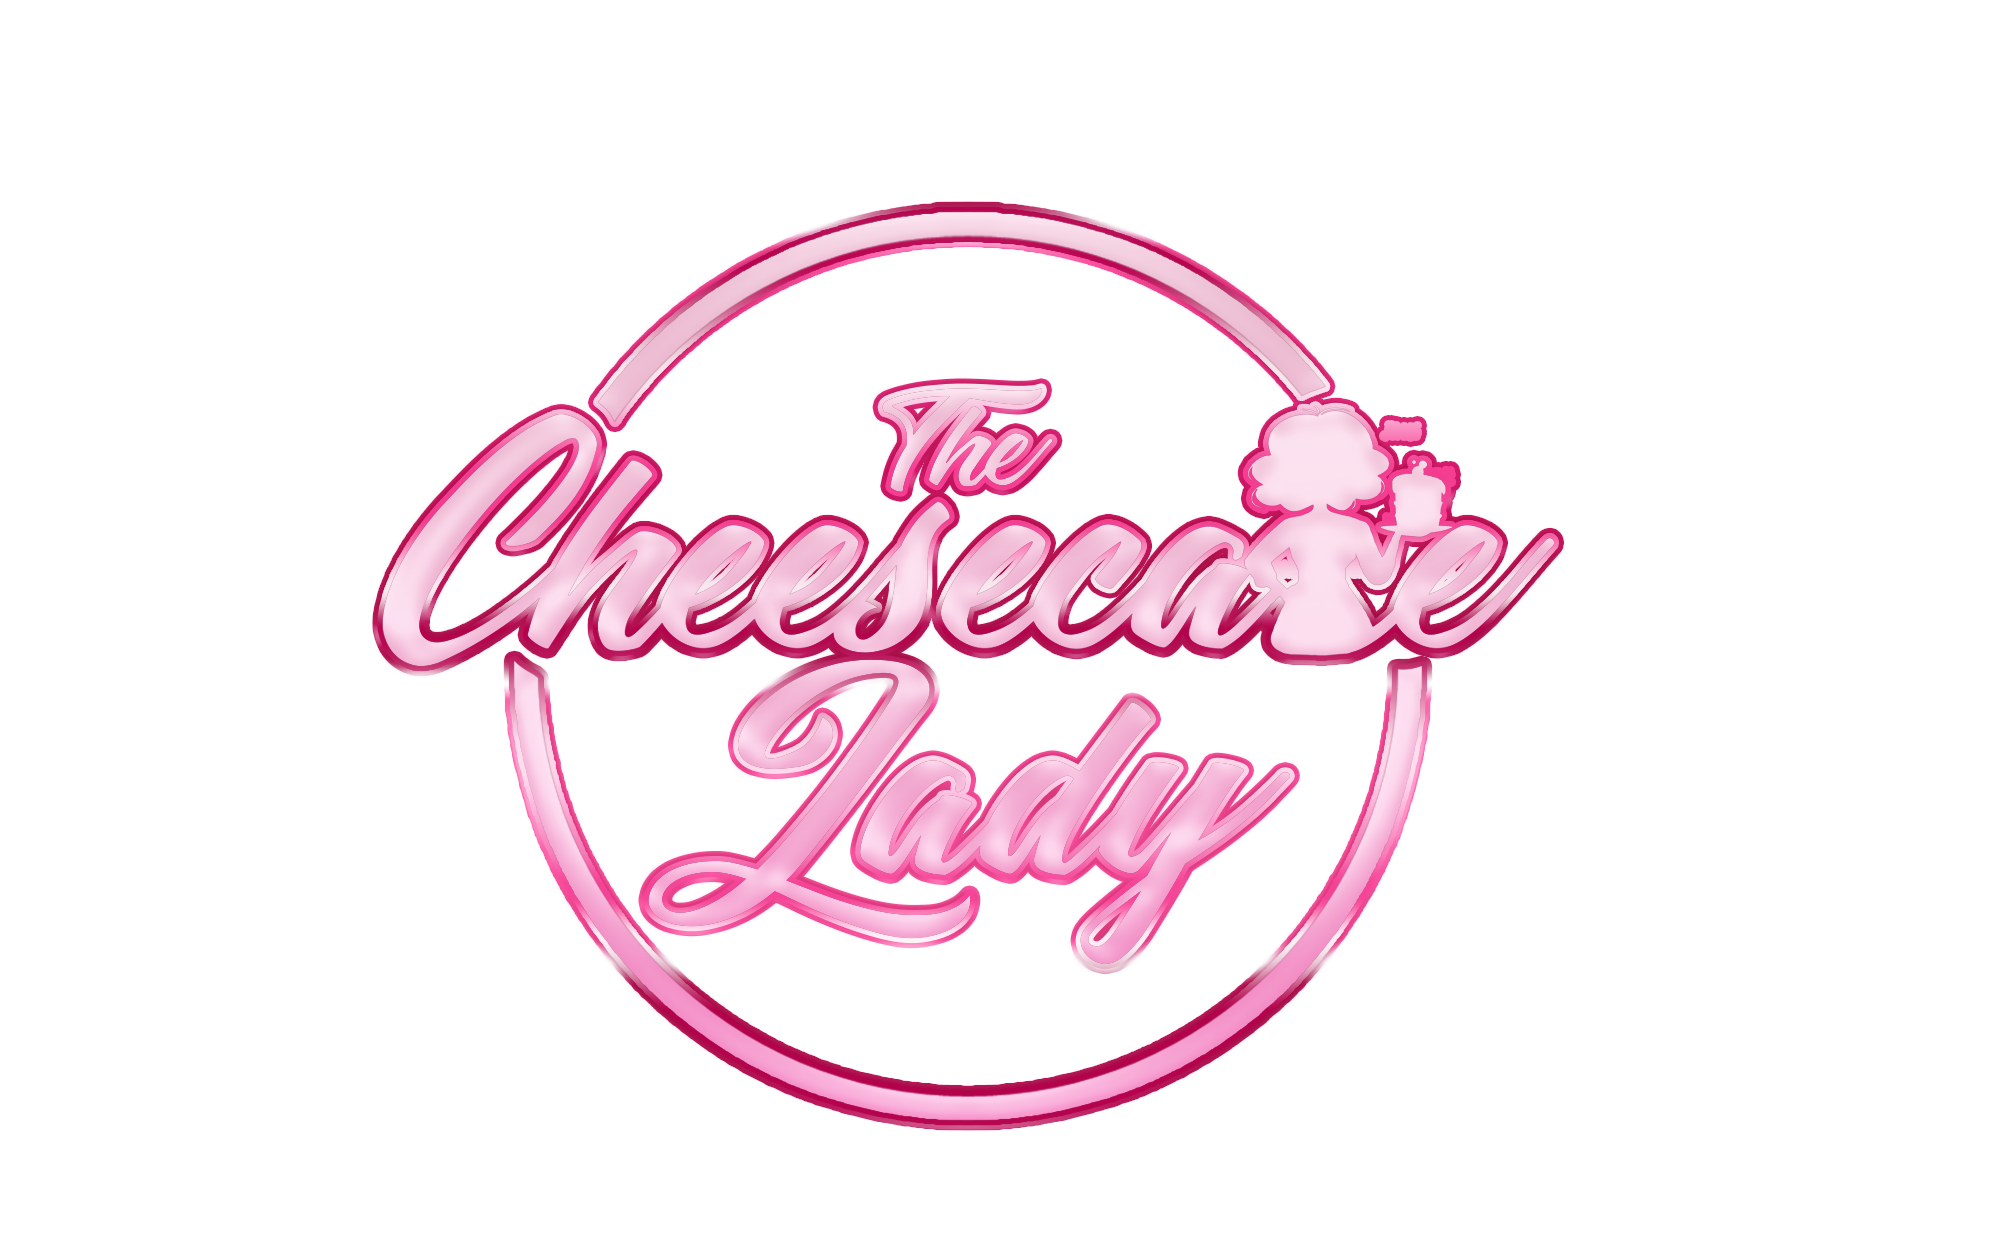 The Cheesecake Lady Indy